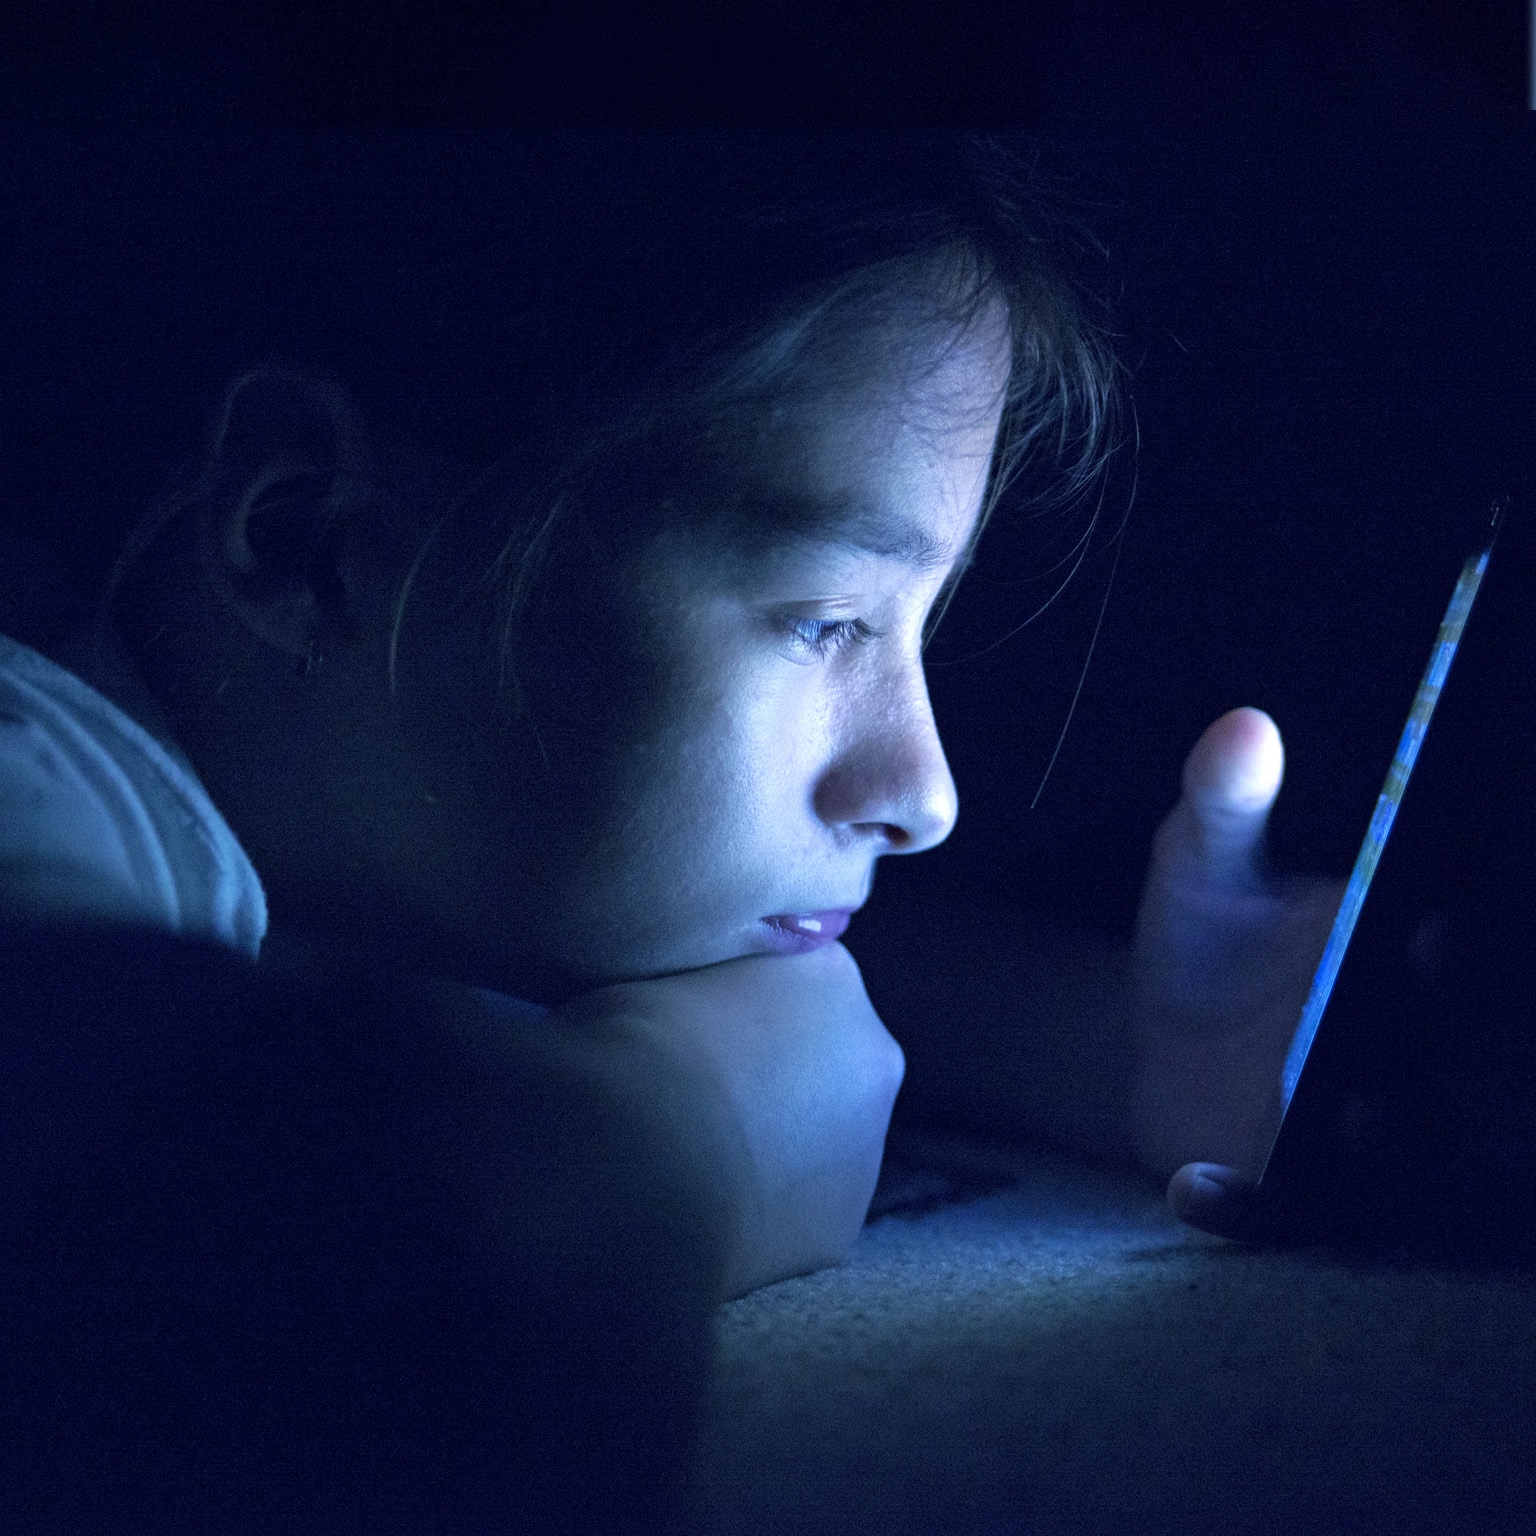 Child staring at phone in a dark room